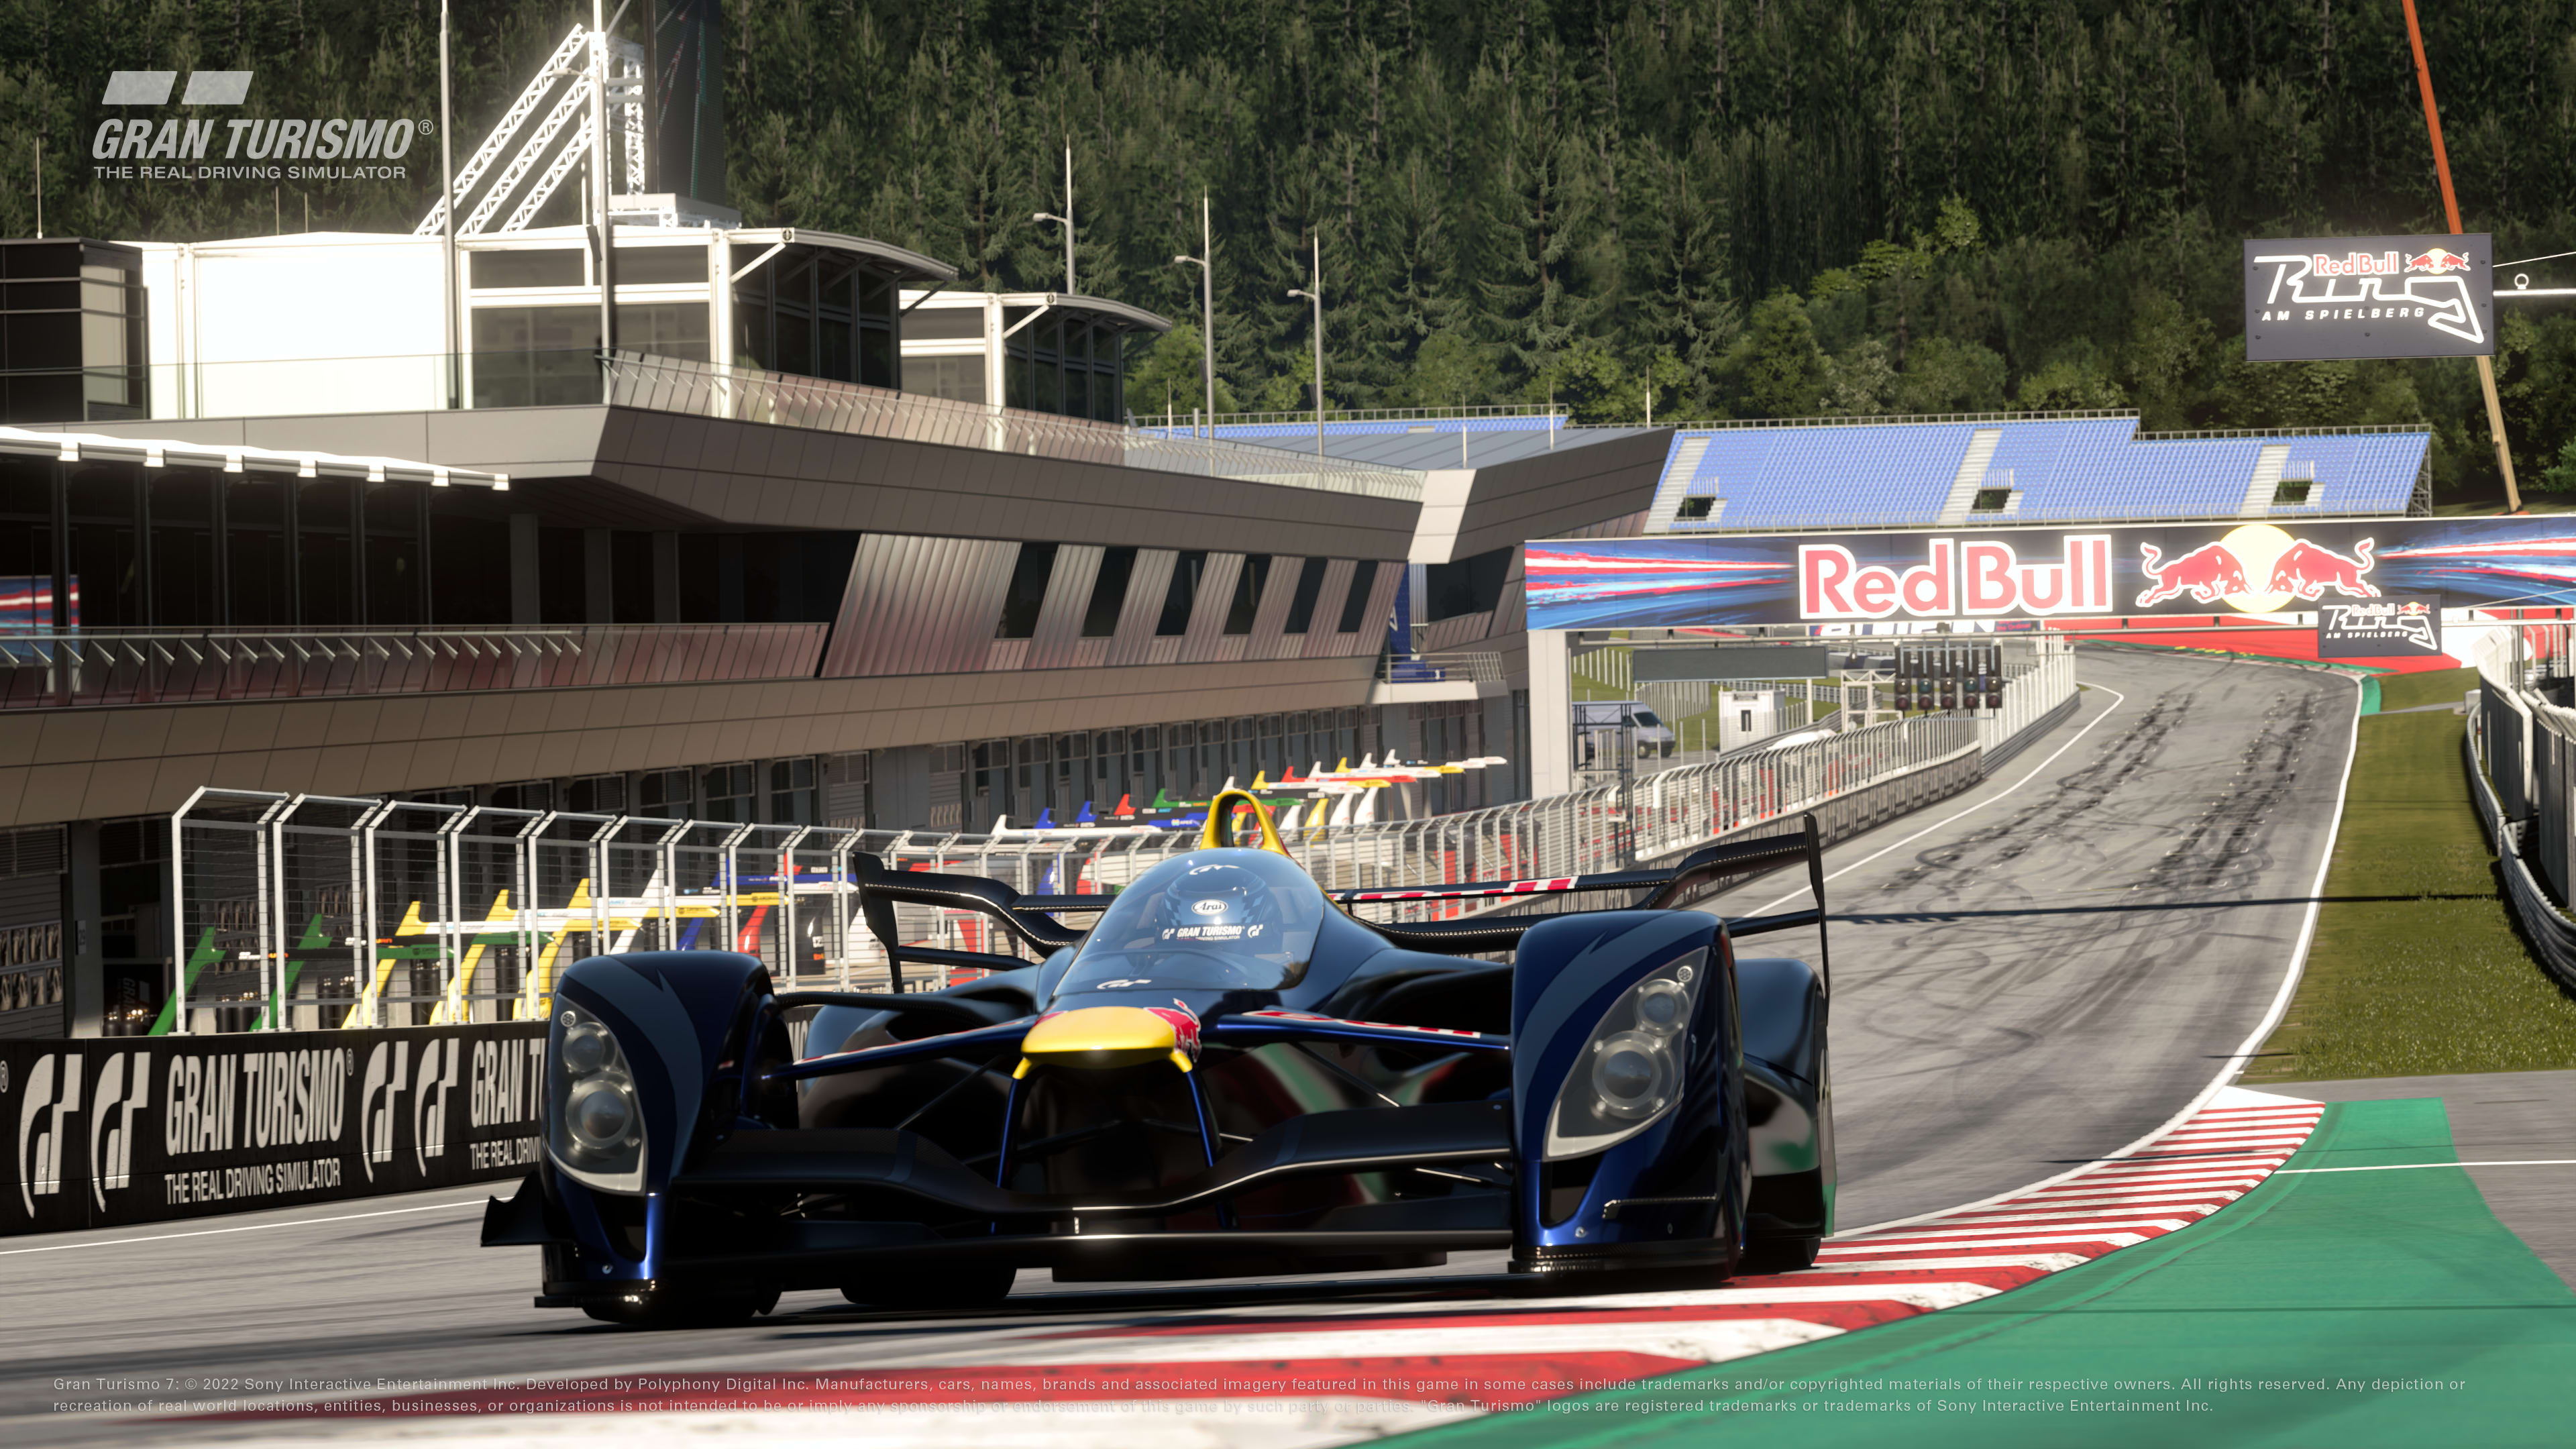 Gran Turismo 7 To Offer More Tuning Options Than Ever Before